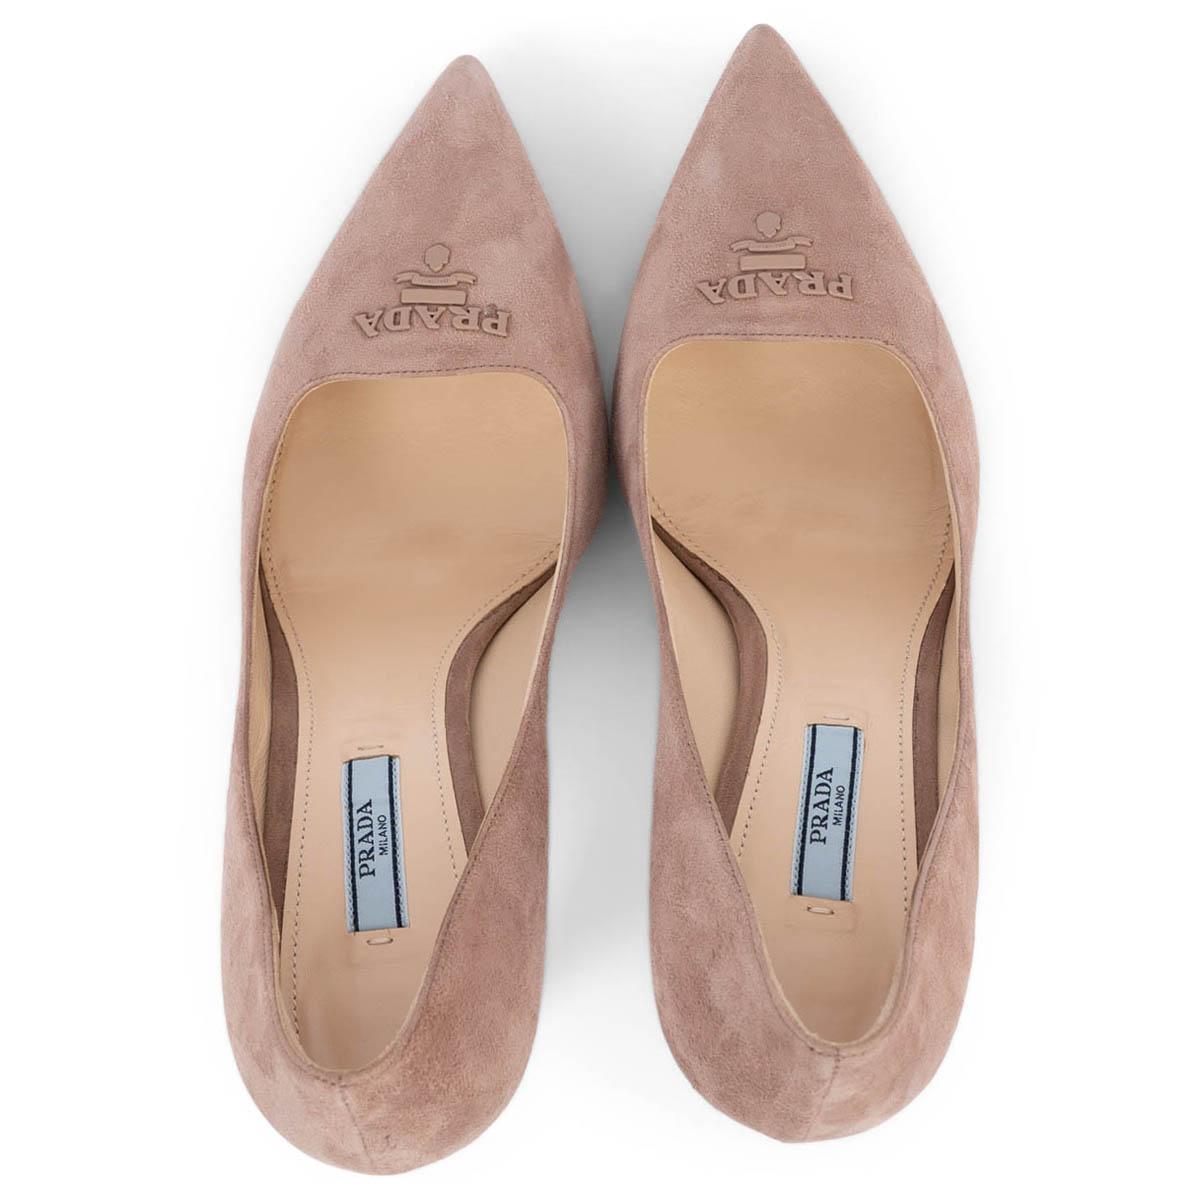 PRADA dusty rose suede LOGO POINTED TOE Pumps Shoes 39.5 For Sale 1